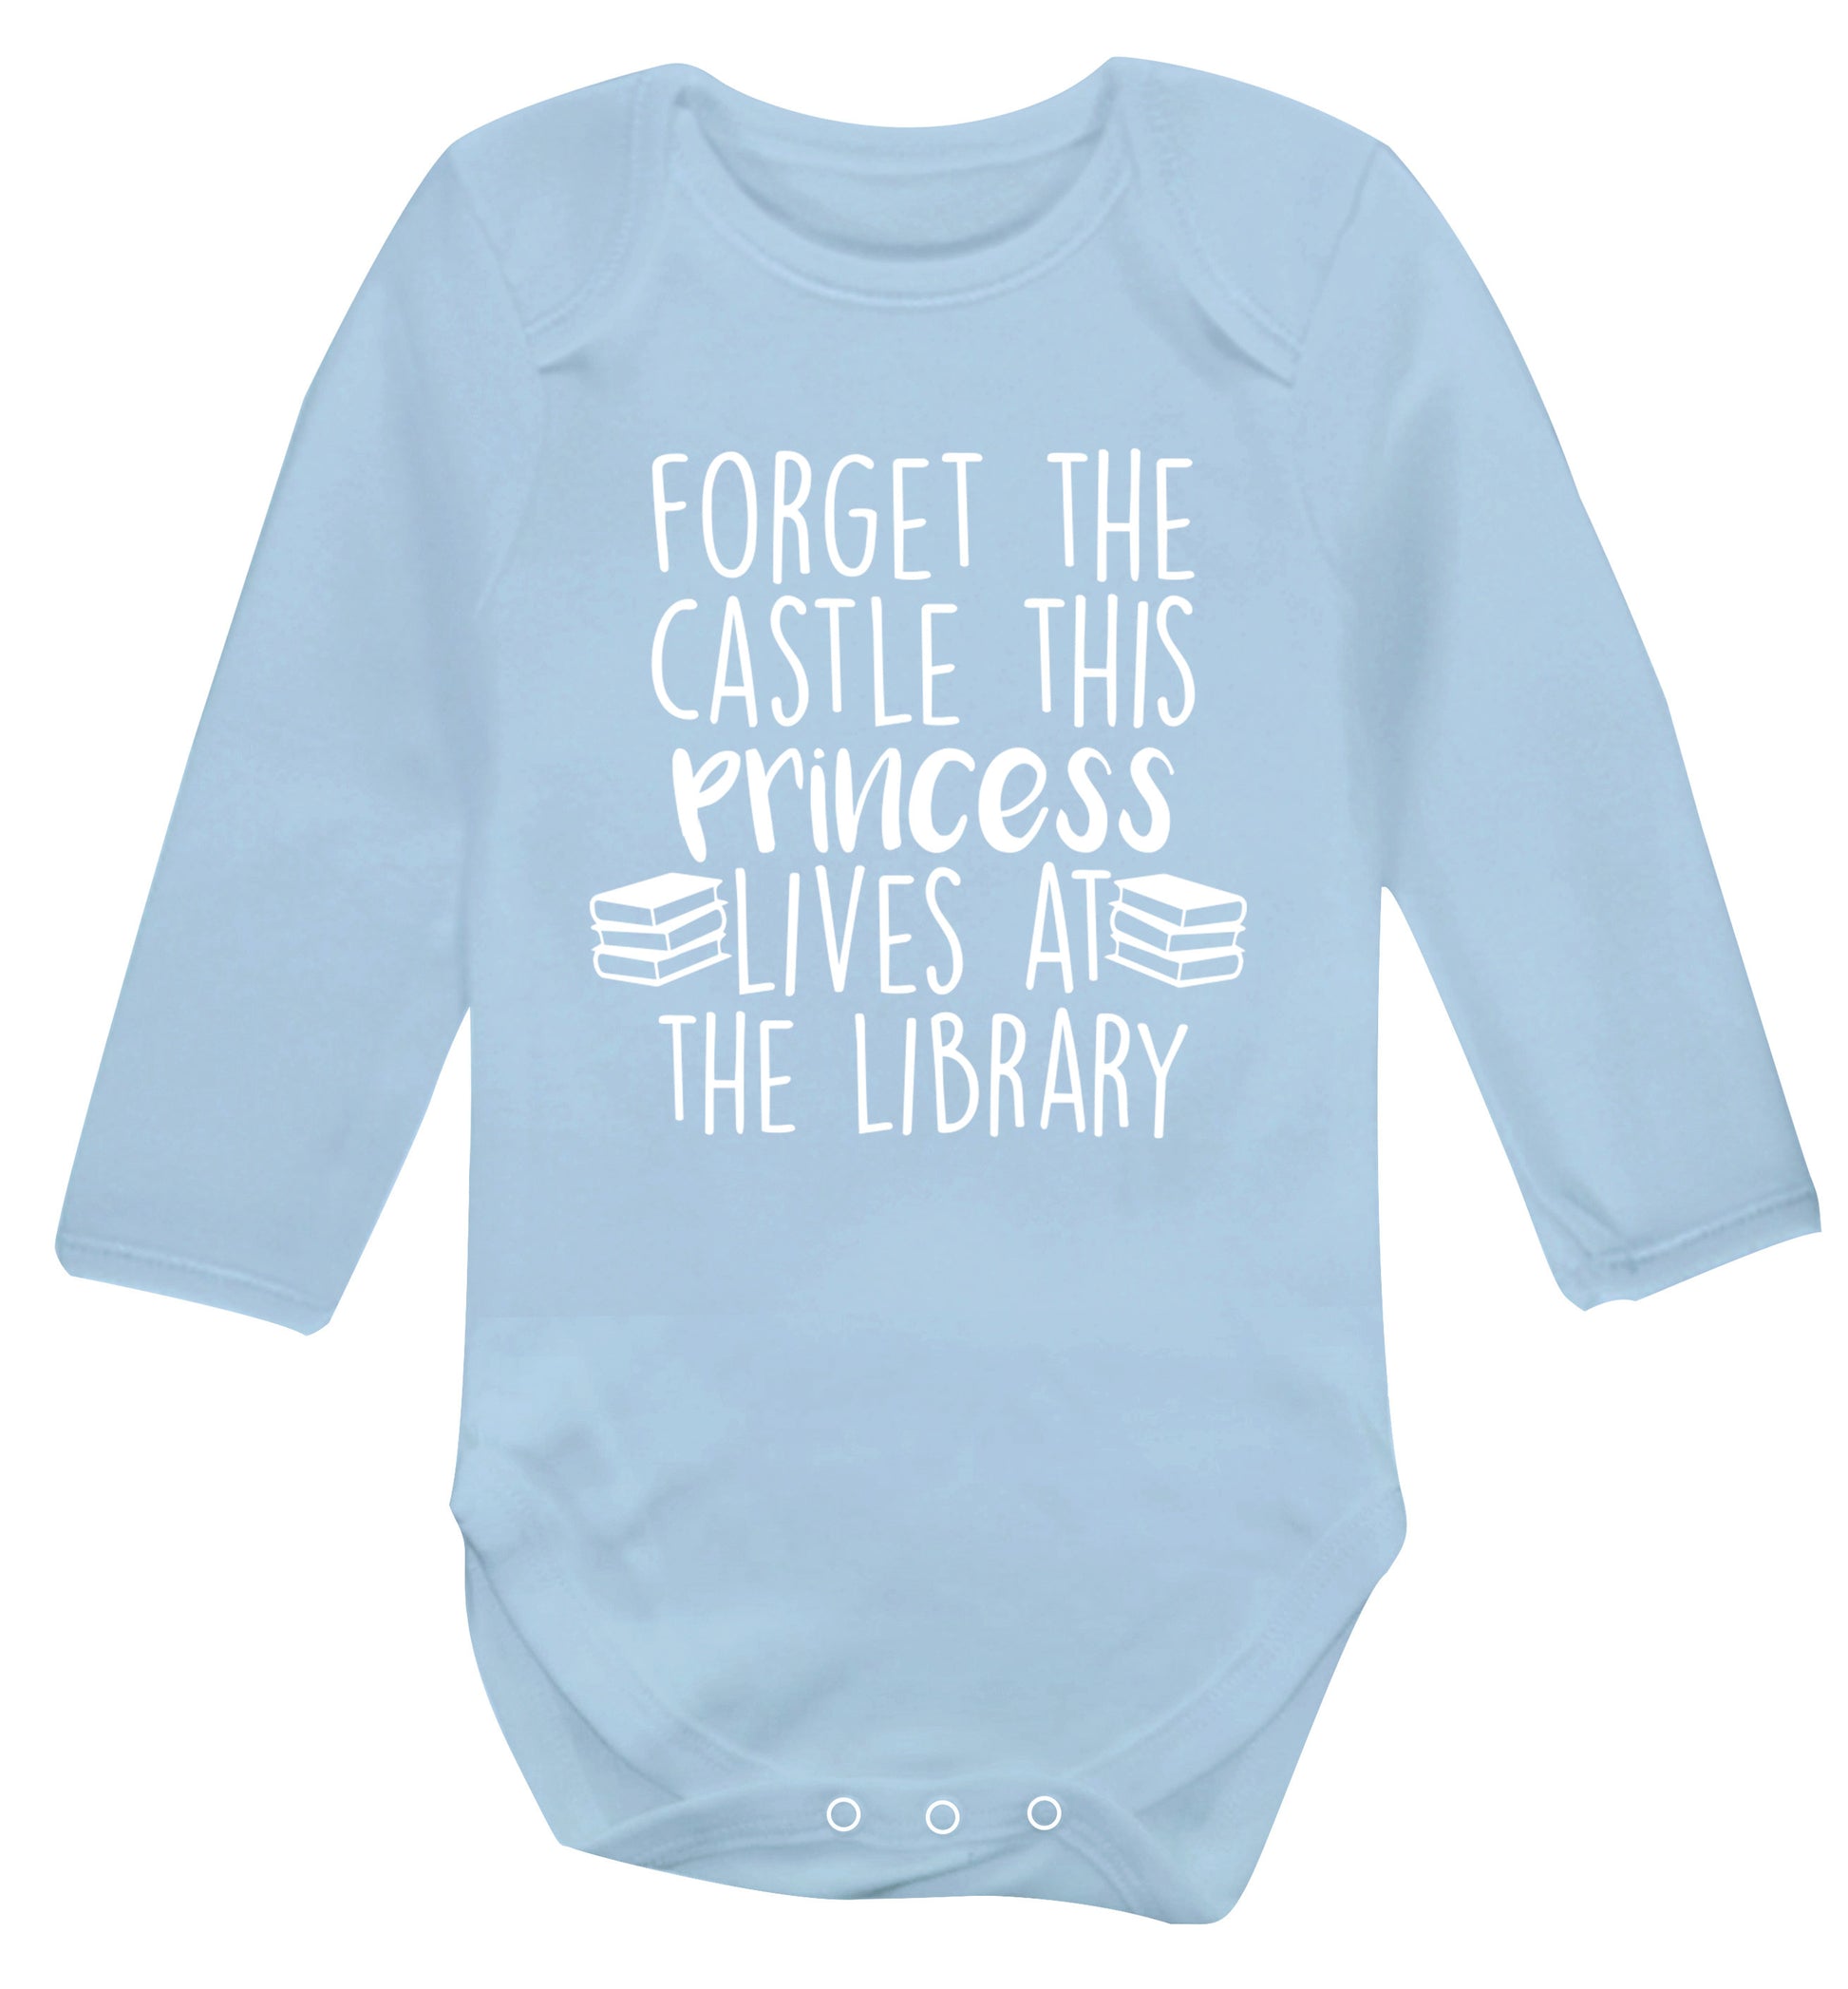 Forget the castle this princess lives at the library Baby Vest long sleeved pale blue 6-12 months